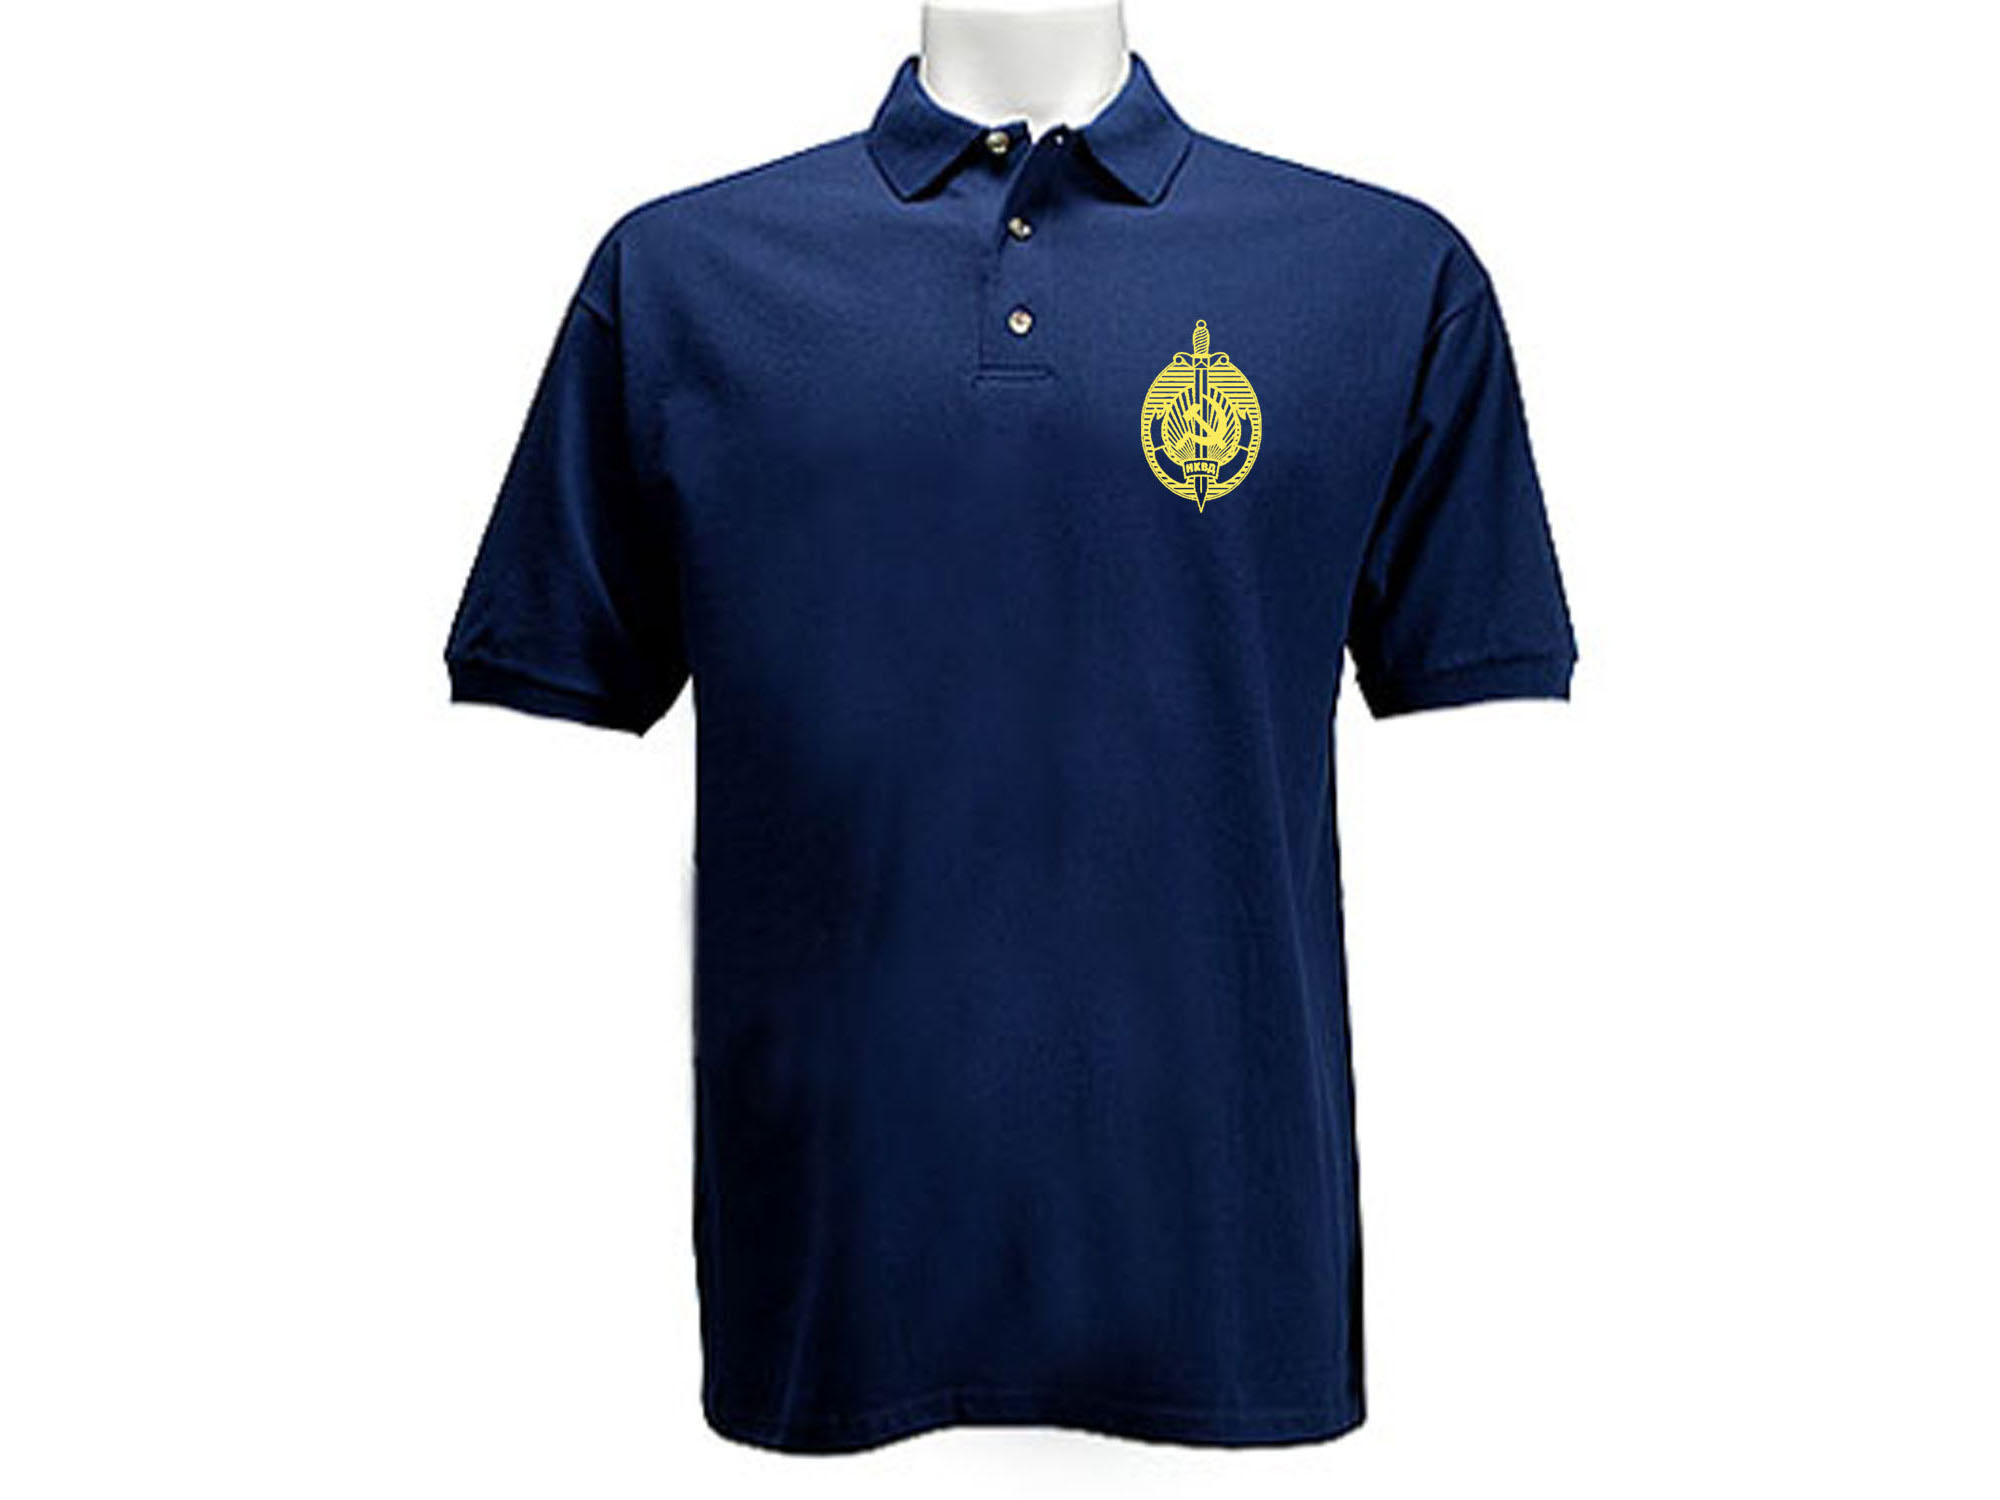 NKVD russian national security agency polo style navy blue shirt